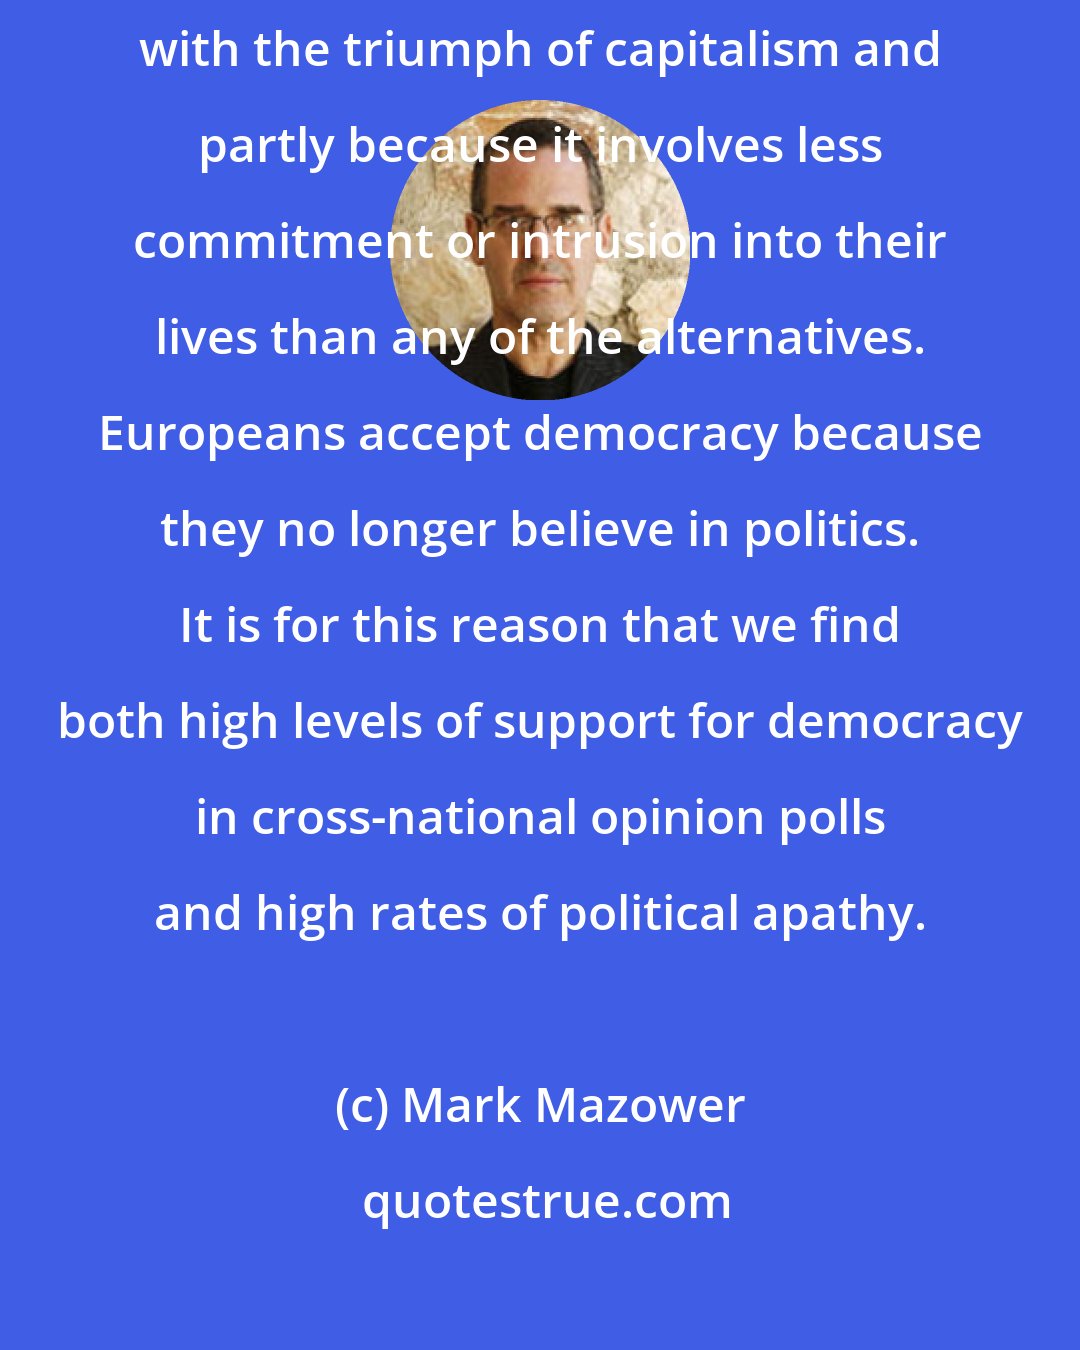 Mark Mazower: Democracy suits Europeans today partly because it is associated with the triumph of capitalism and partly because it involves less commitment or intrusion into their lives than any of the alternatives. Europeans accept democracy because they no longer believe in politics. It is for this reason that we find both high levels of support for democracy in cross-national opinion polls and high rates of political apathy.